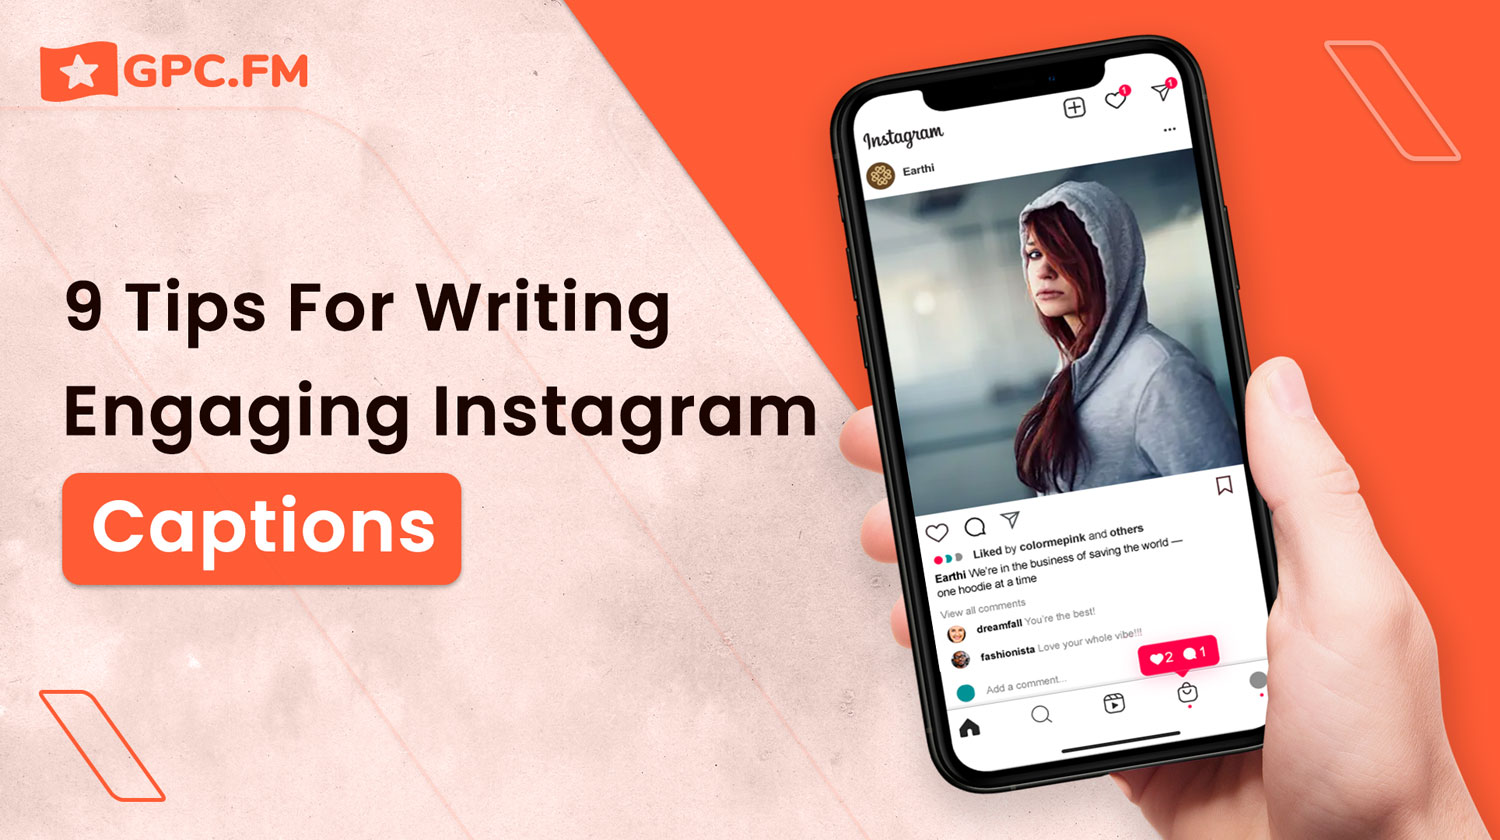 Tips For Writing Engaging Instagram Captions